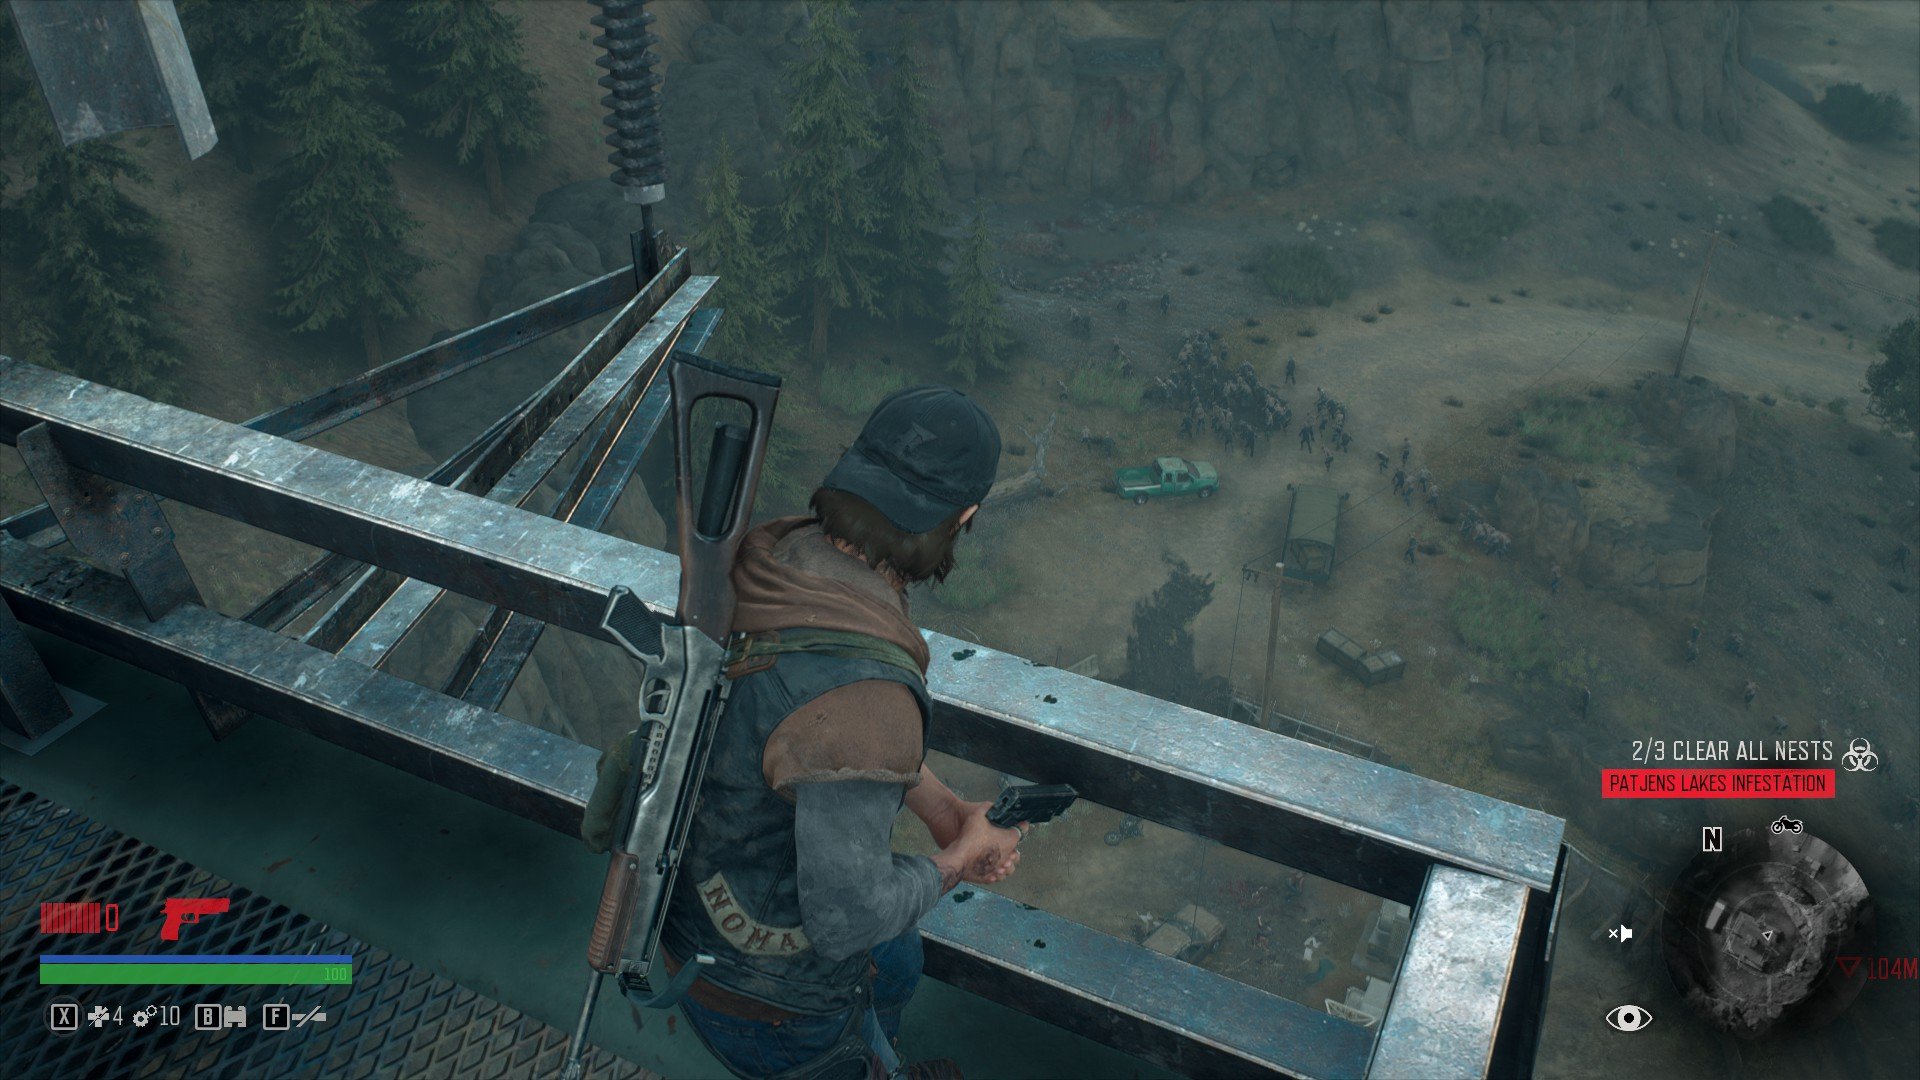 Days Gone is coming to PC on May 18th with improved graphics and